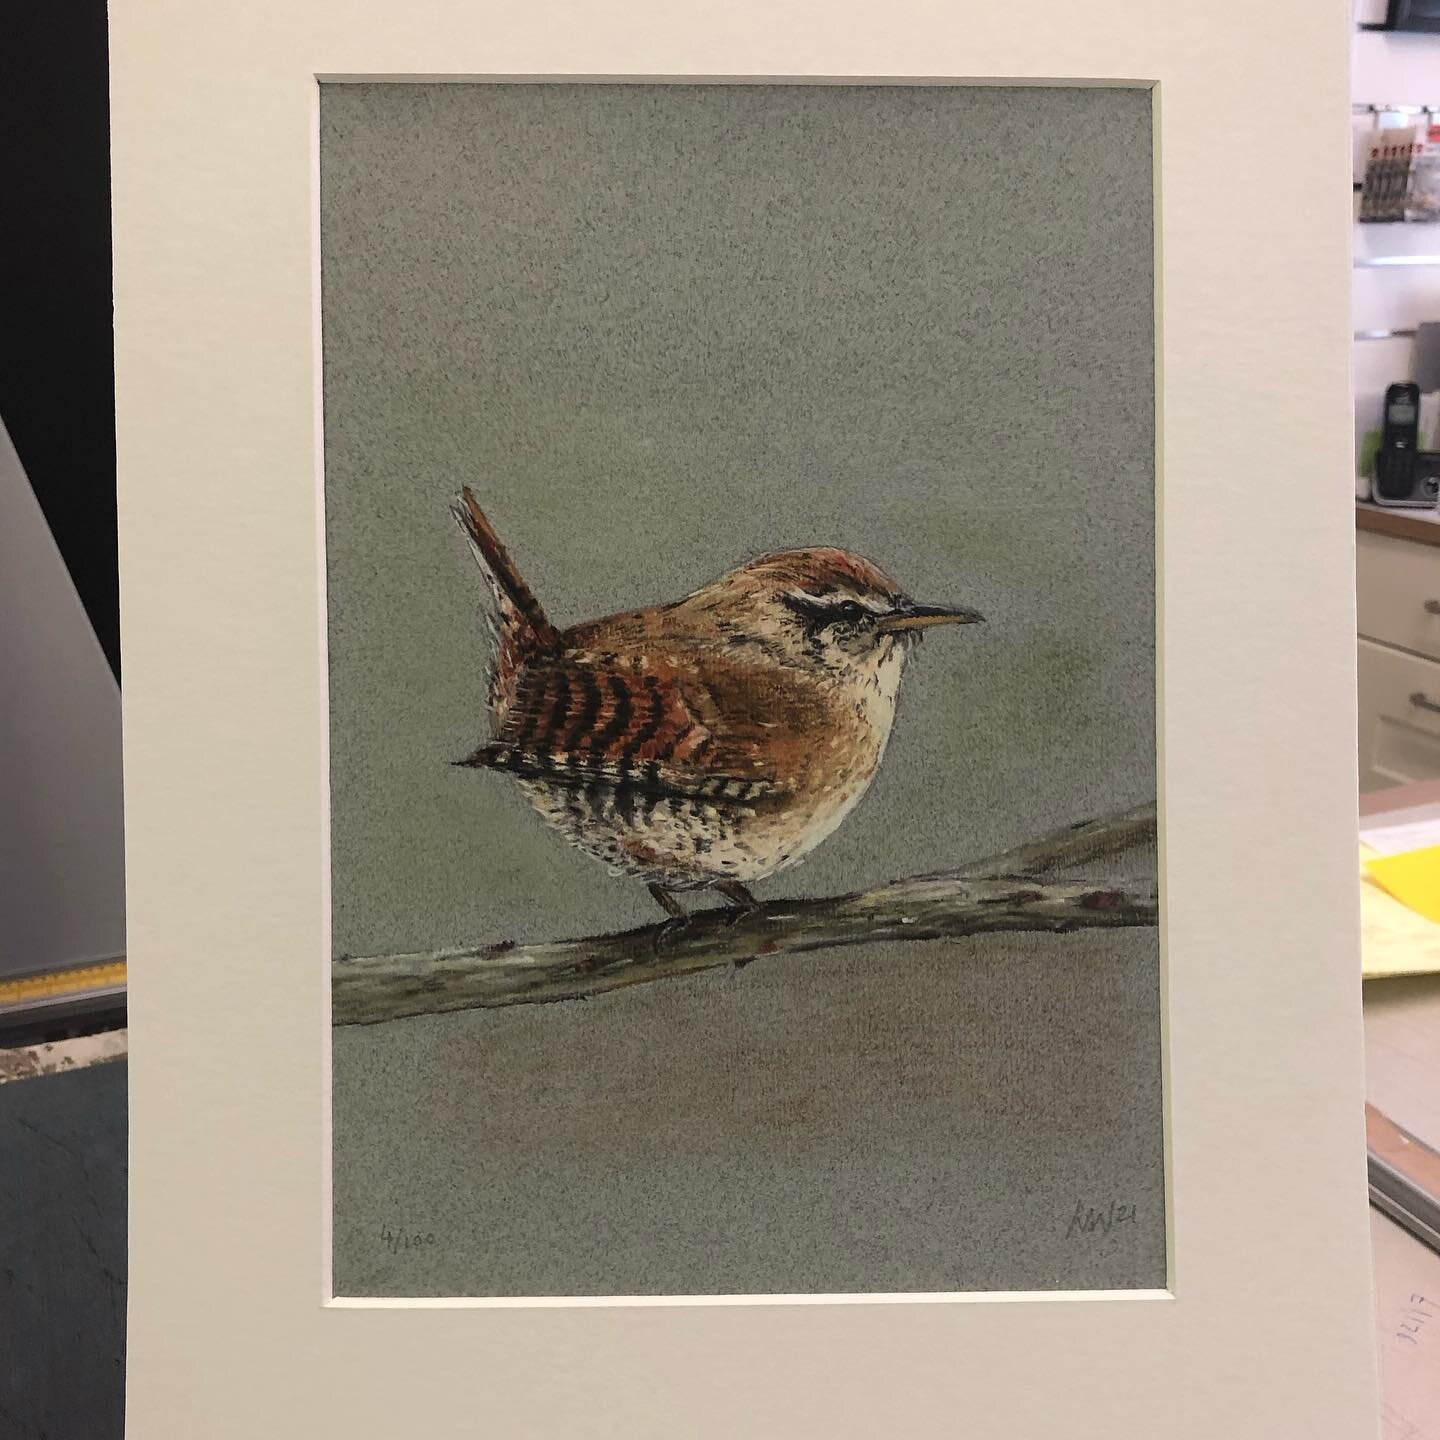 We are very excited to now be stocking the work of local wildlife artist Lizzie Webb, @applewoodart